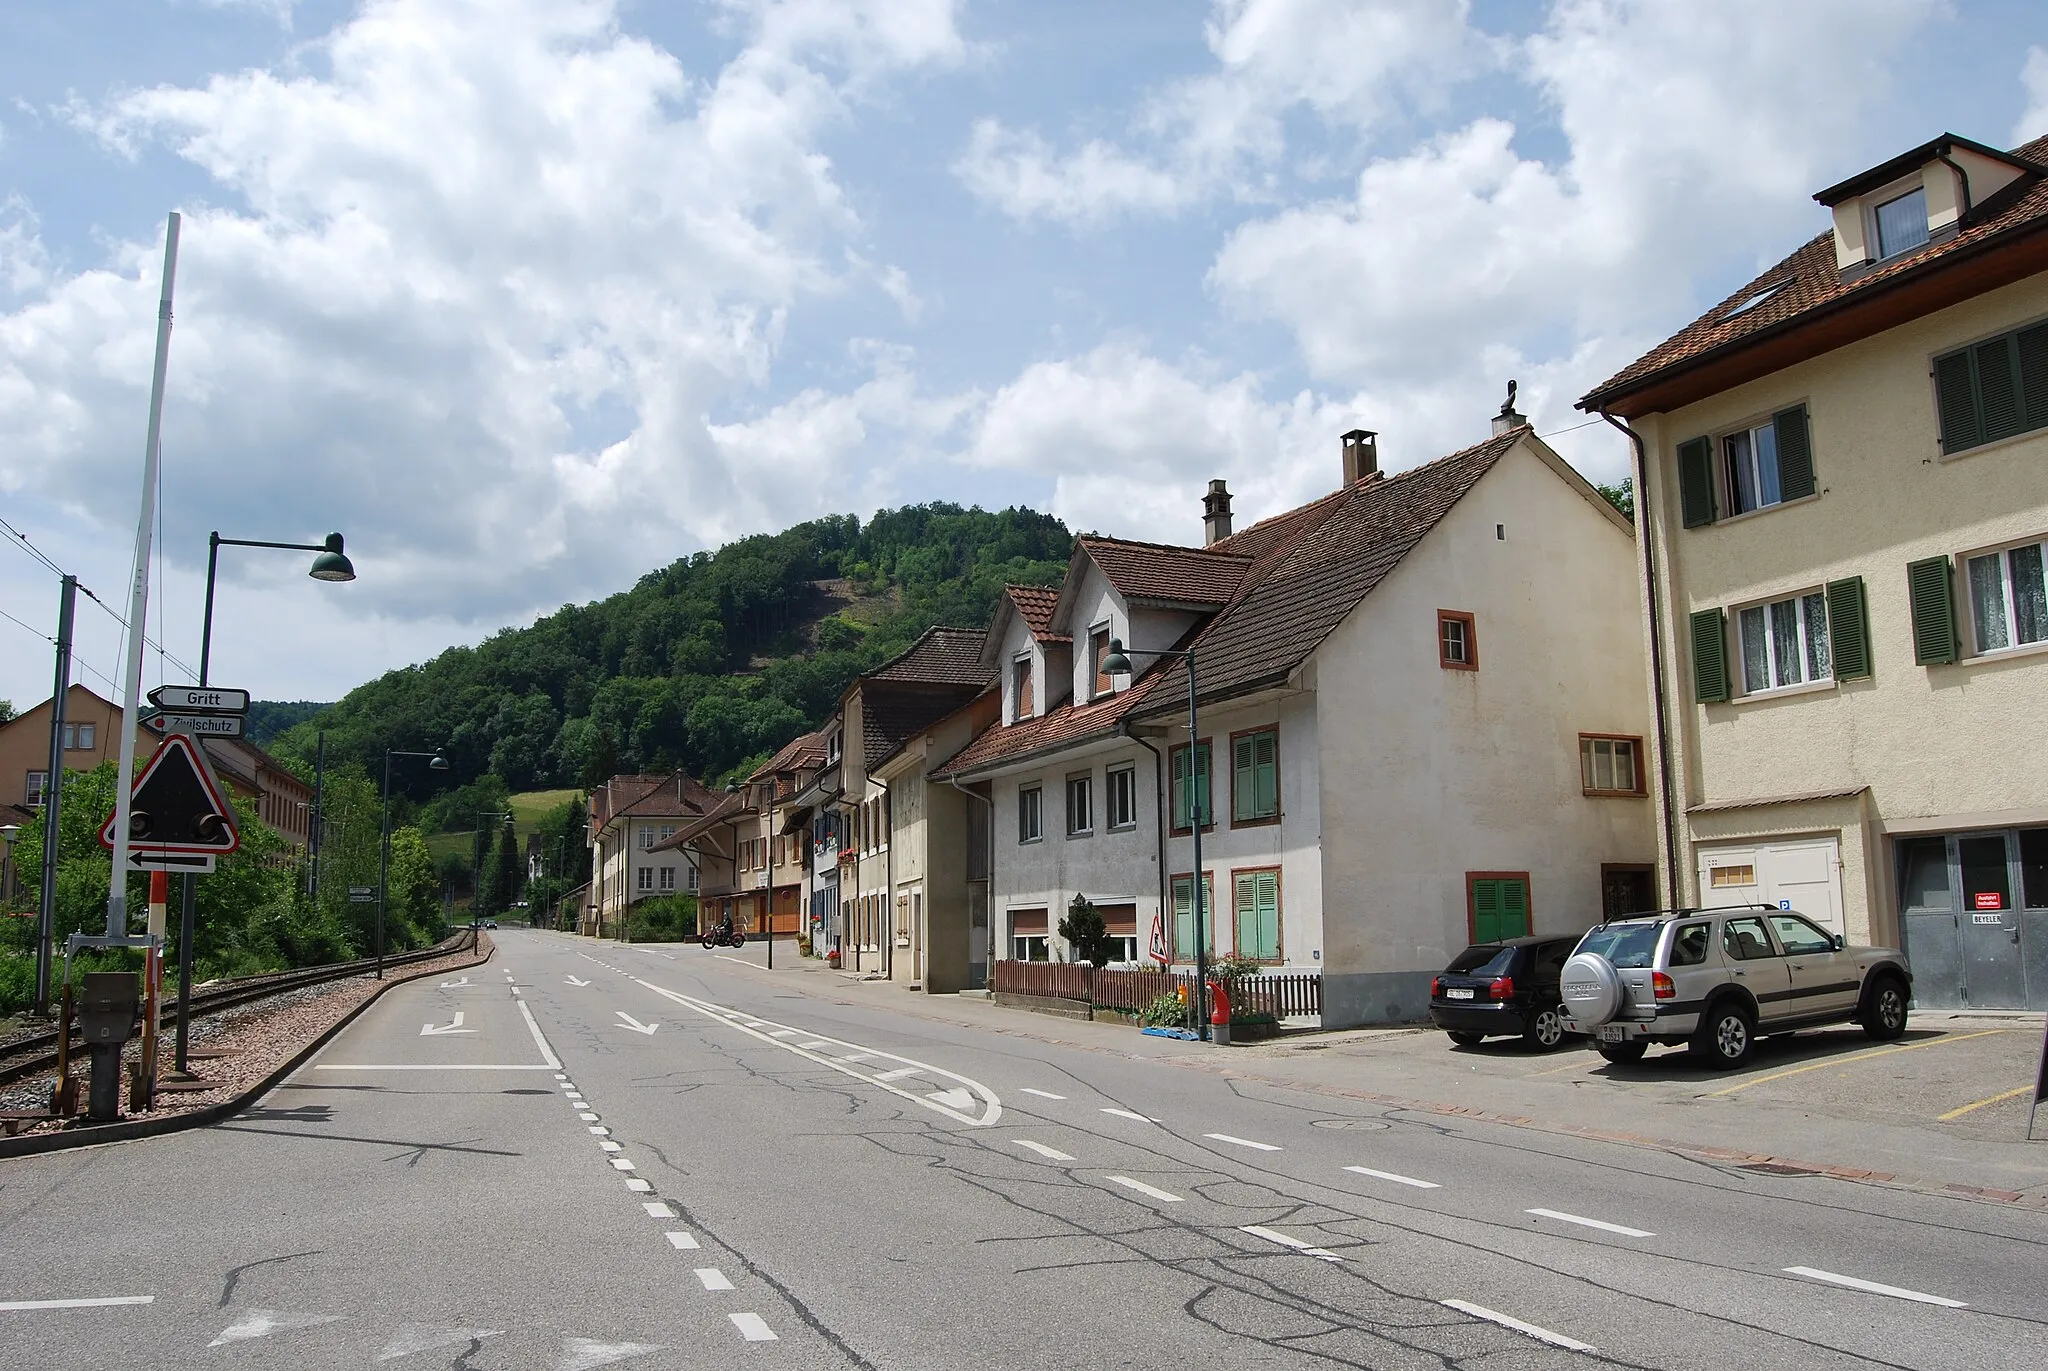 Photo showing: Niederdorf, canton of Basel-Country, Switzerland